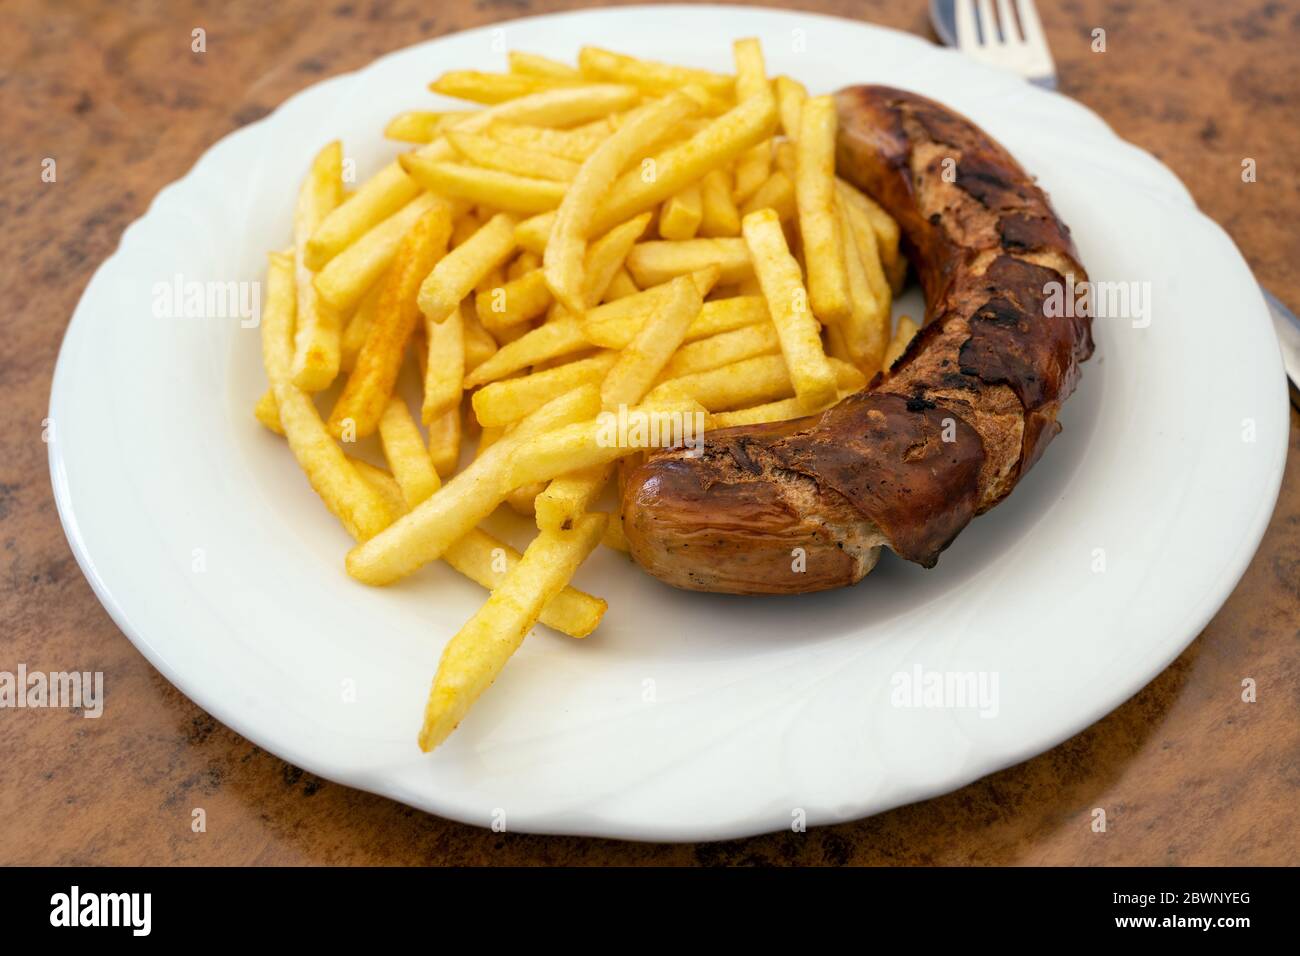 Grilled sausage, German Bratwurst, and french fries on a plate in a fast food restaurant, tasty but unhealthy eating with trans fat and saturated fatt Stock Photo